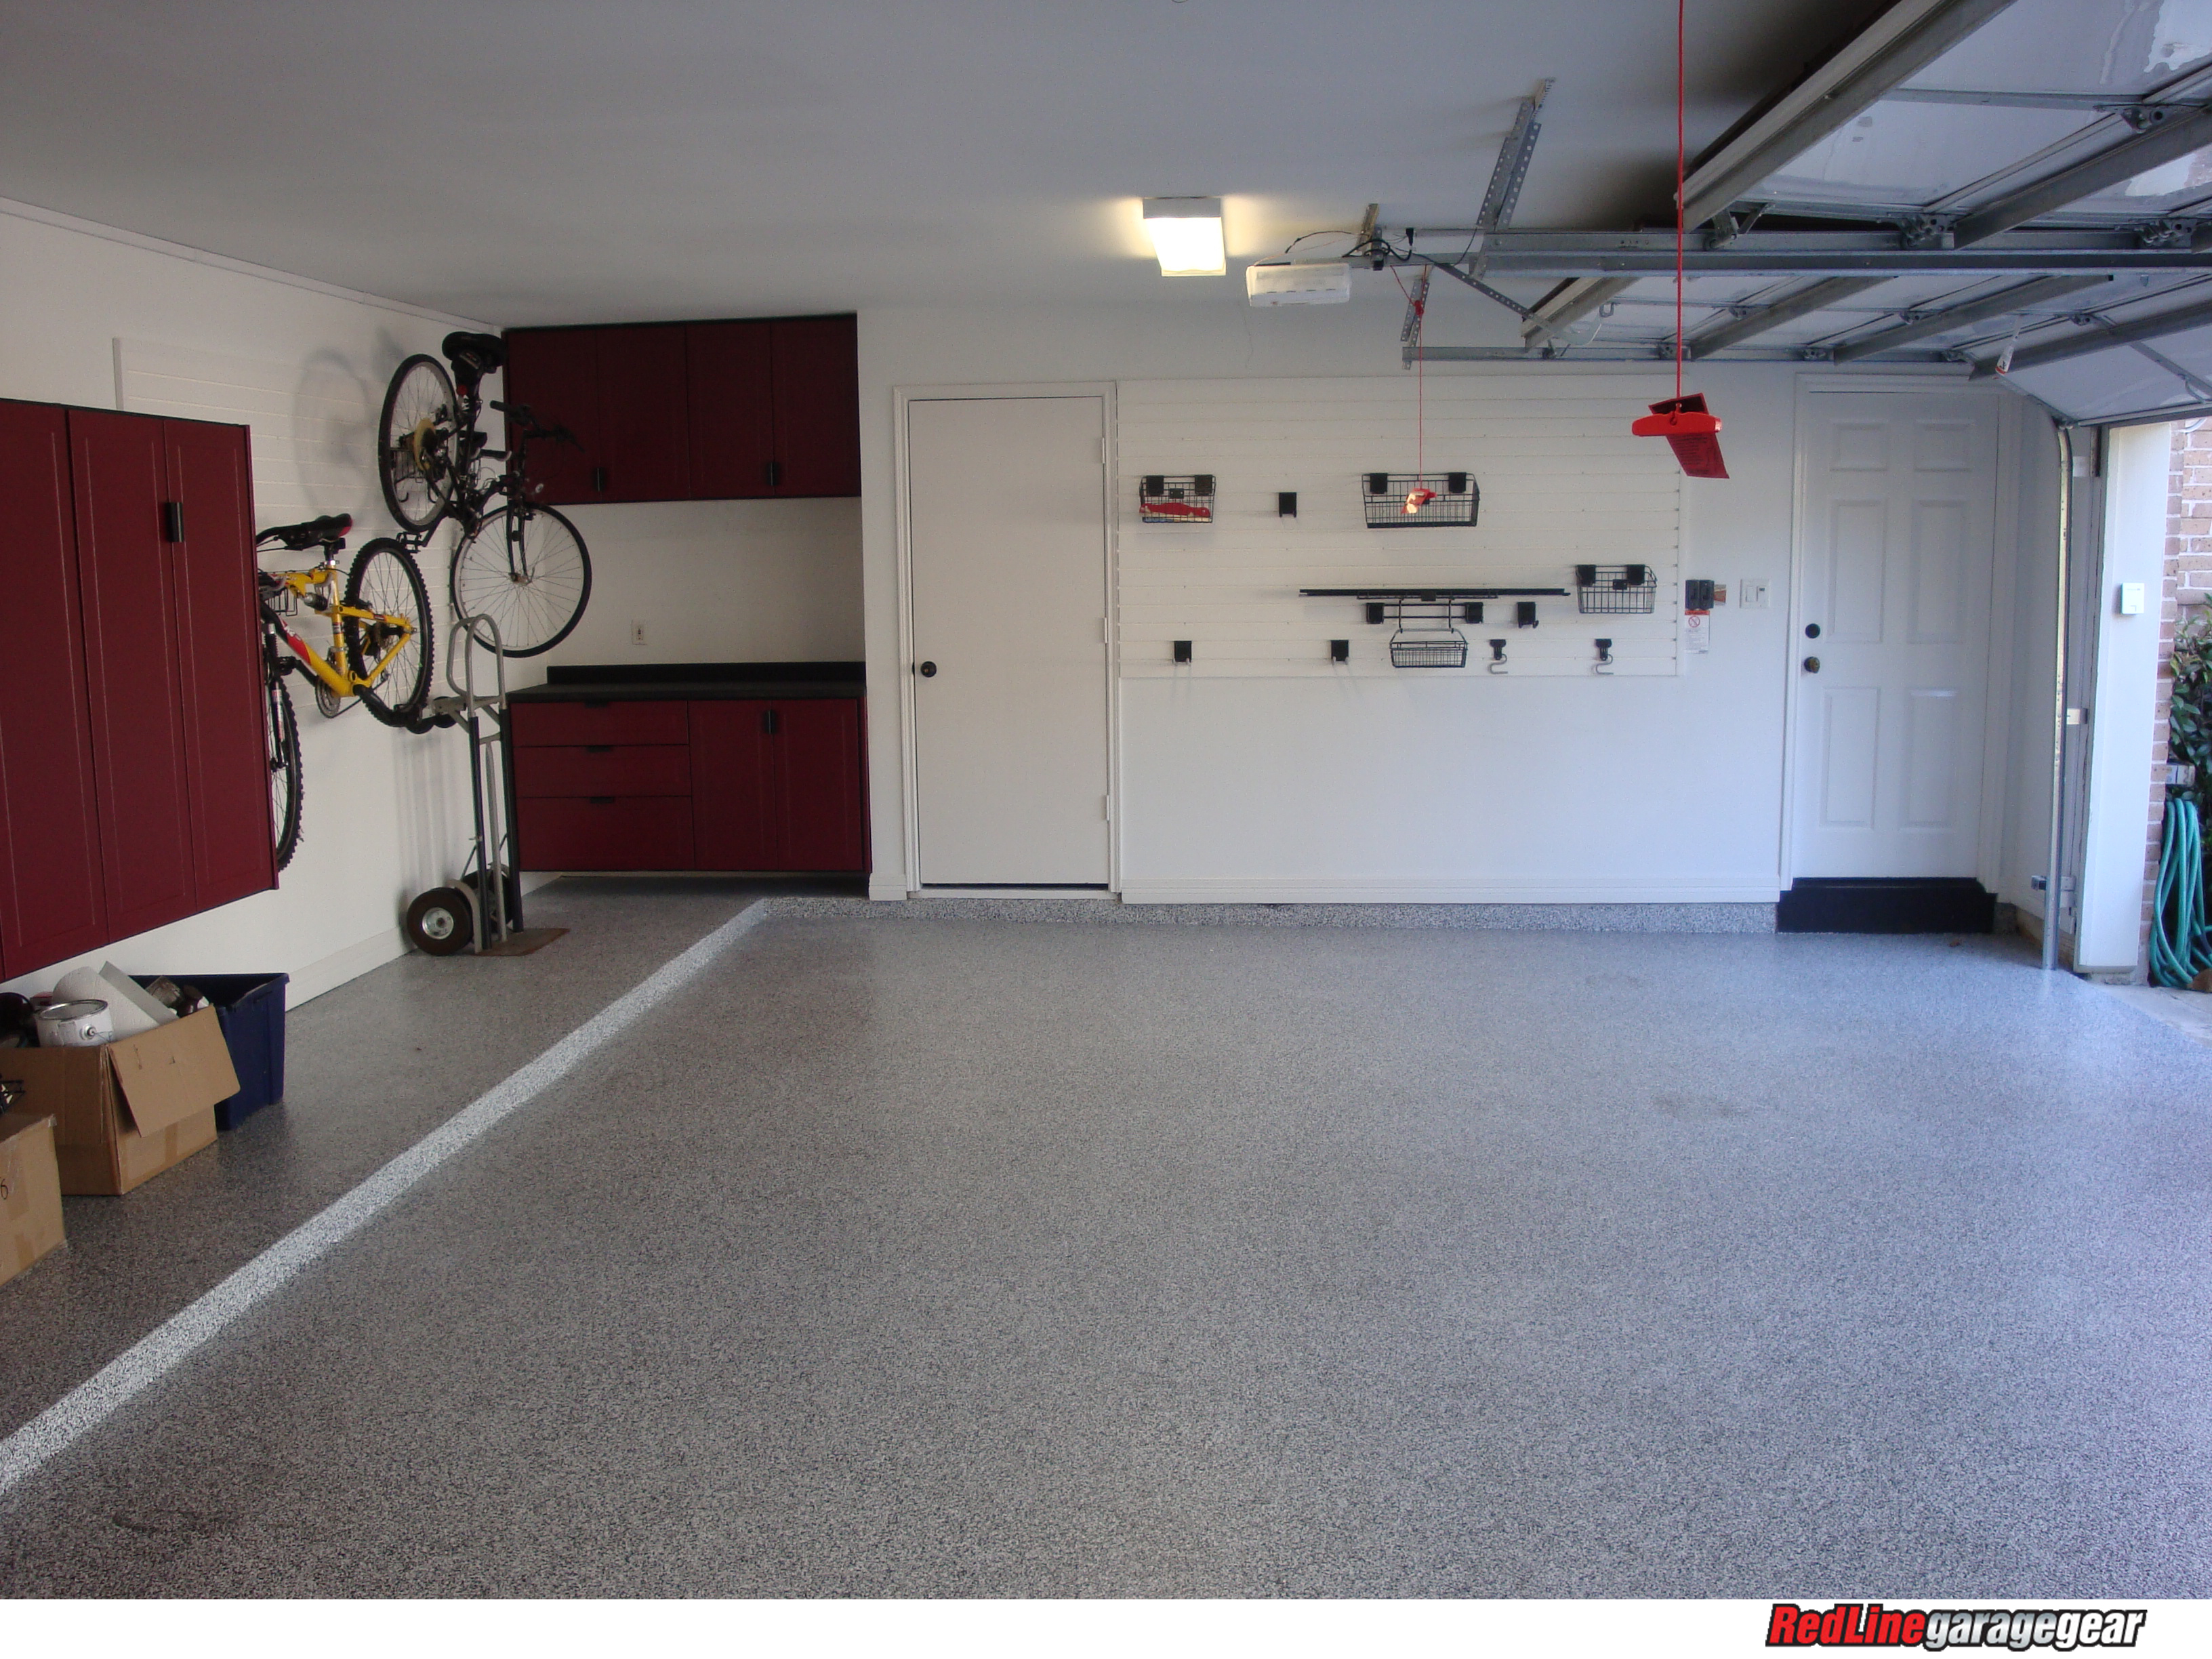 Wife Surprises Husband with a New Garage and Variety of Garage Storage ...